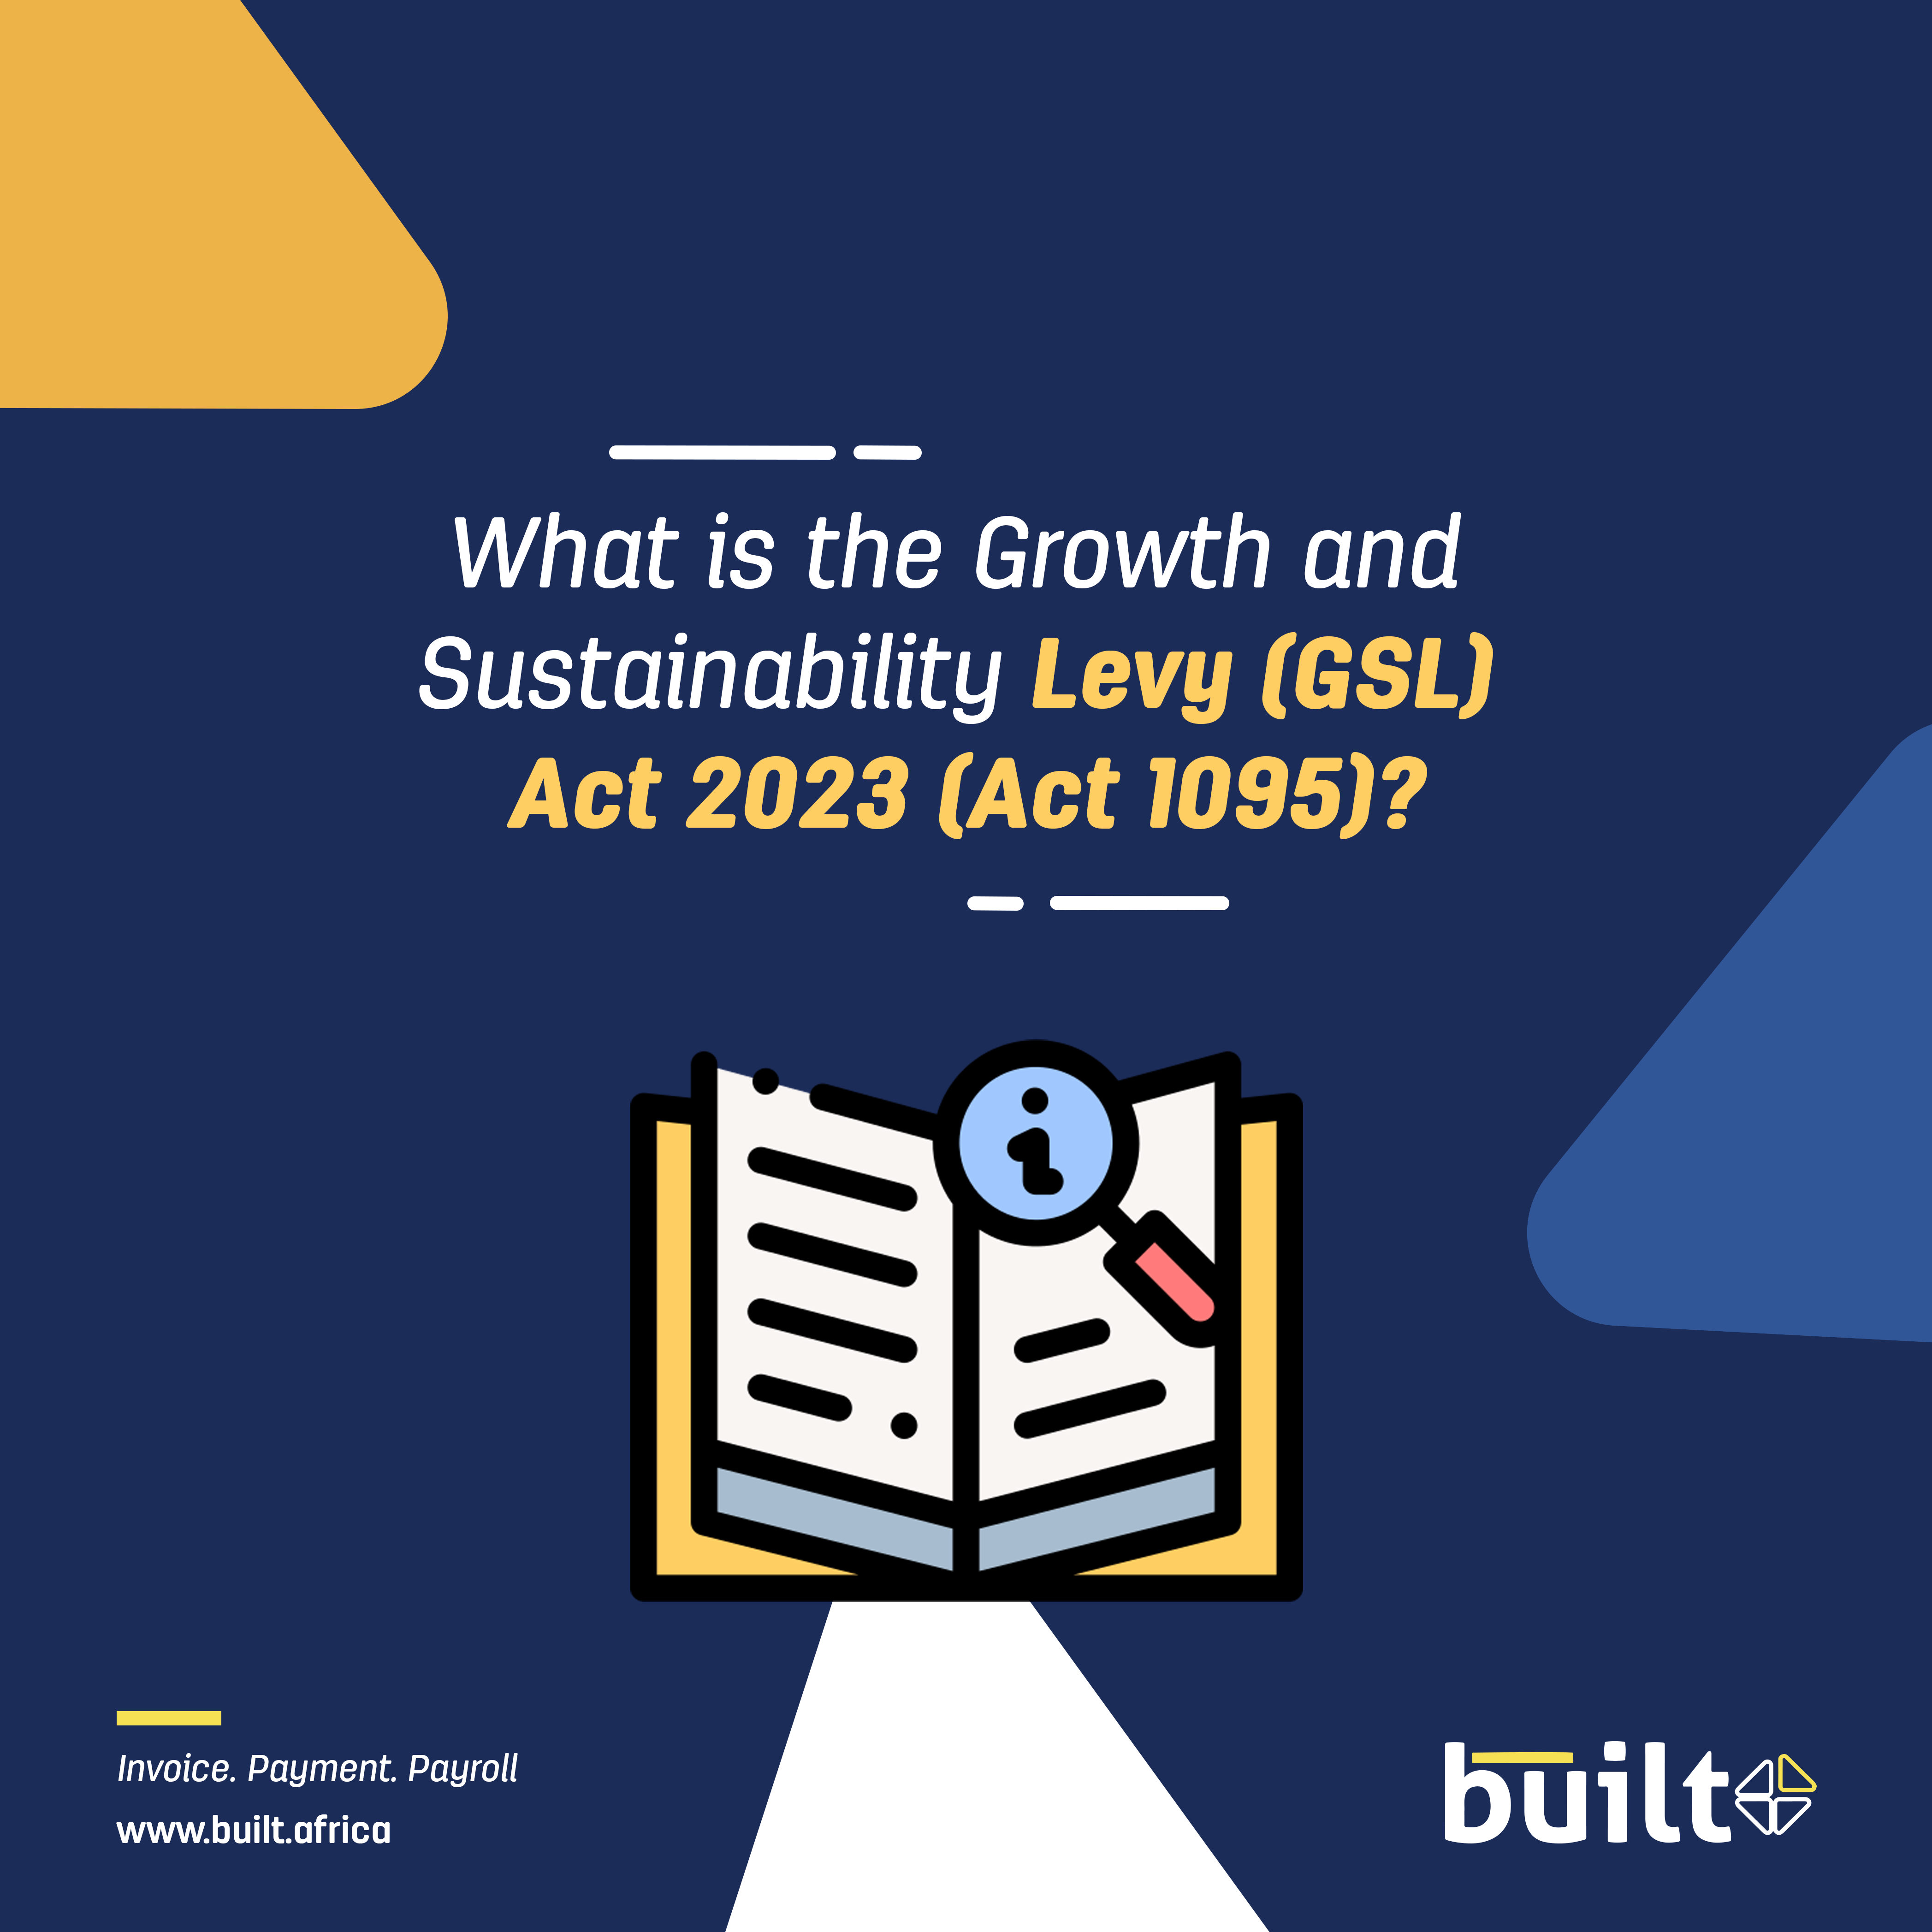 What is the Growth and Sustainability Levy (GSL) Act 2023 (Act 1095)? All you need to know about it.